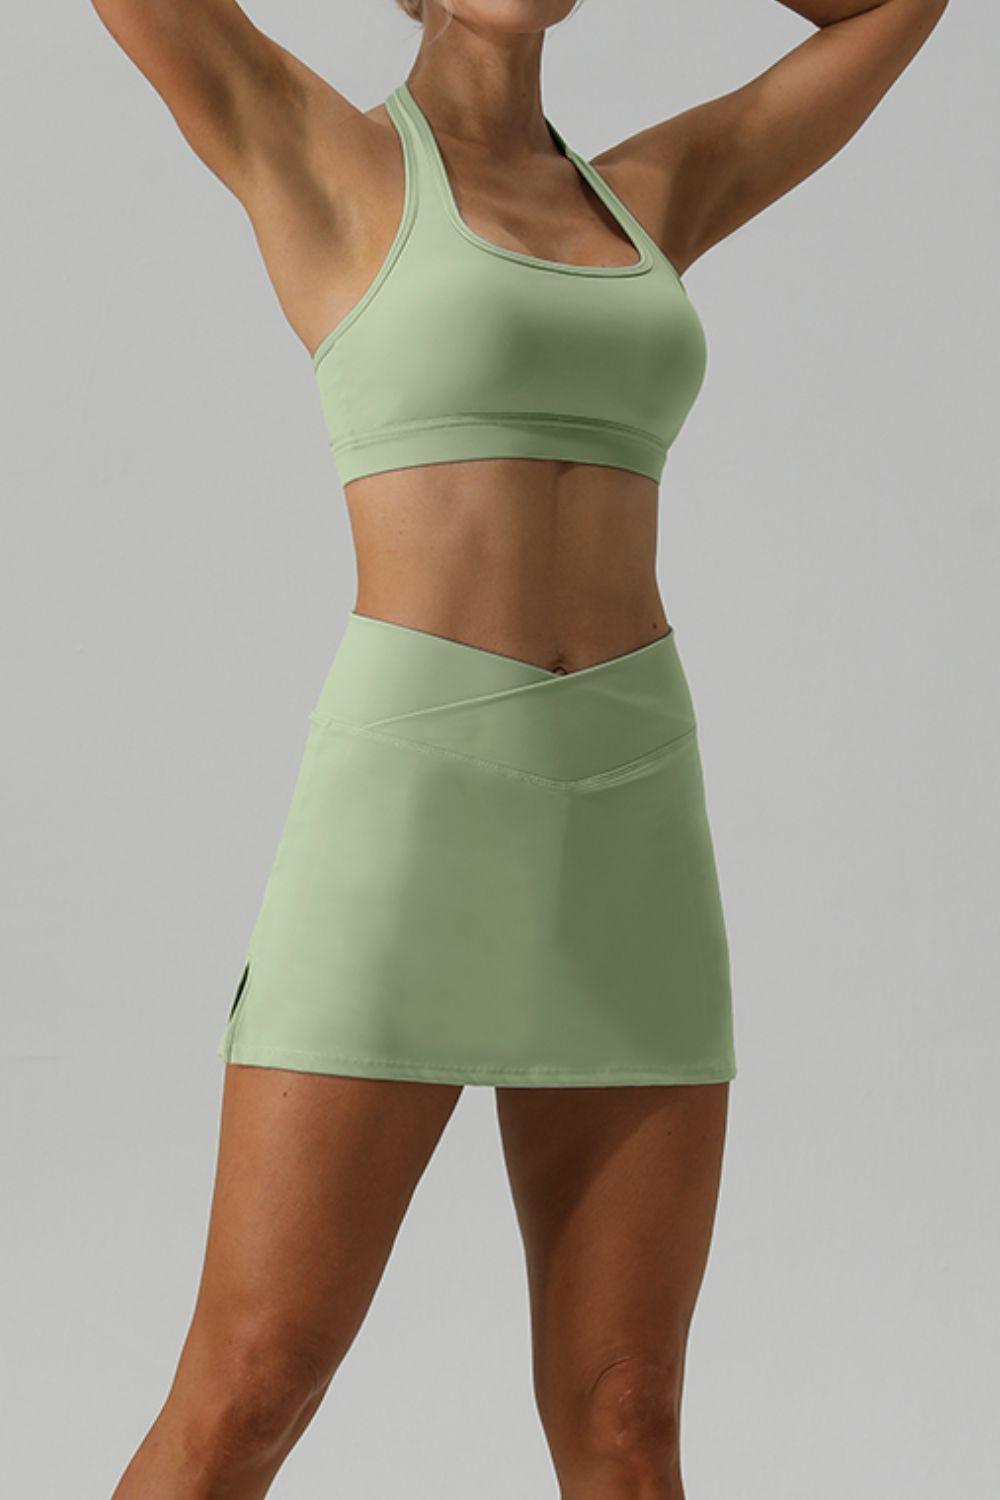 a woman in a short skirt and sports bra top